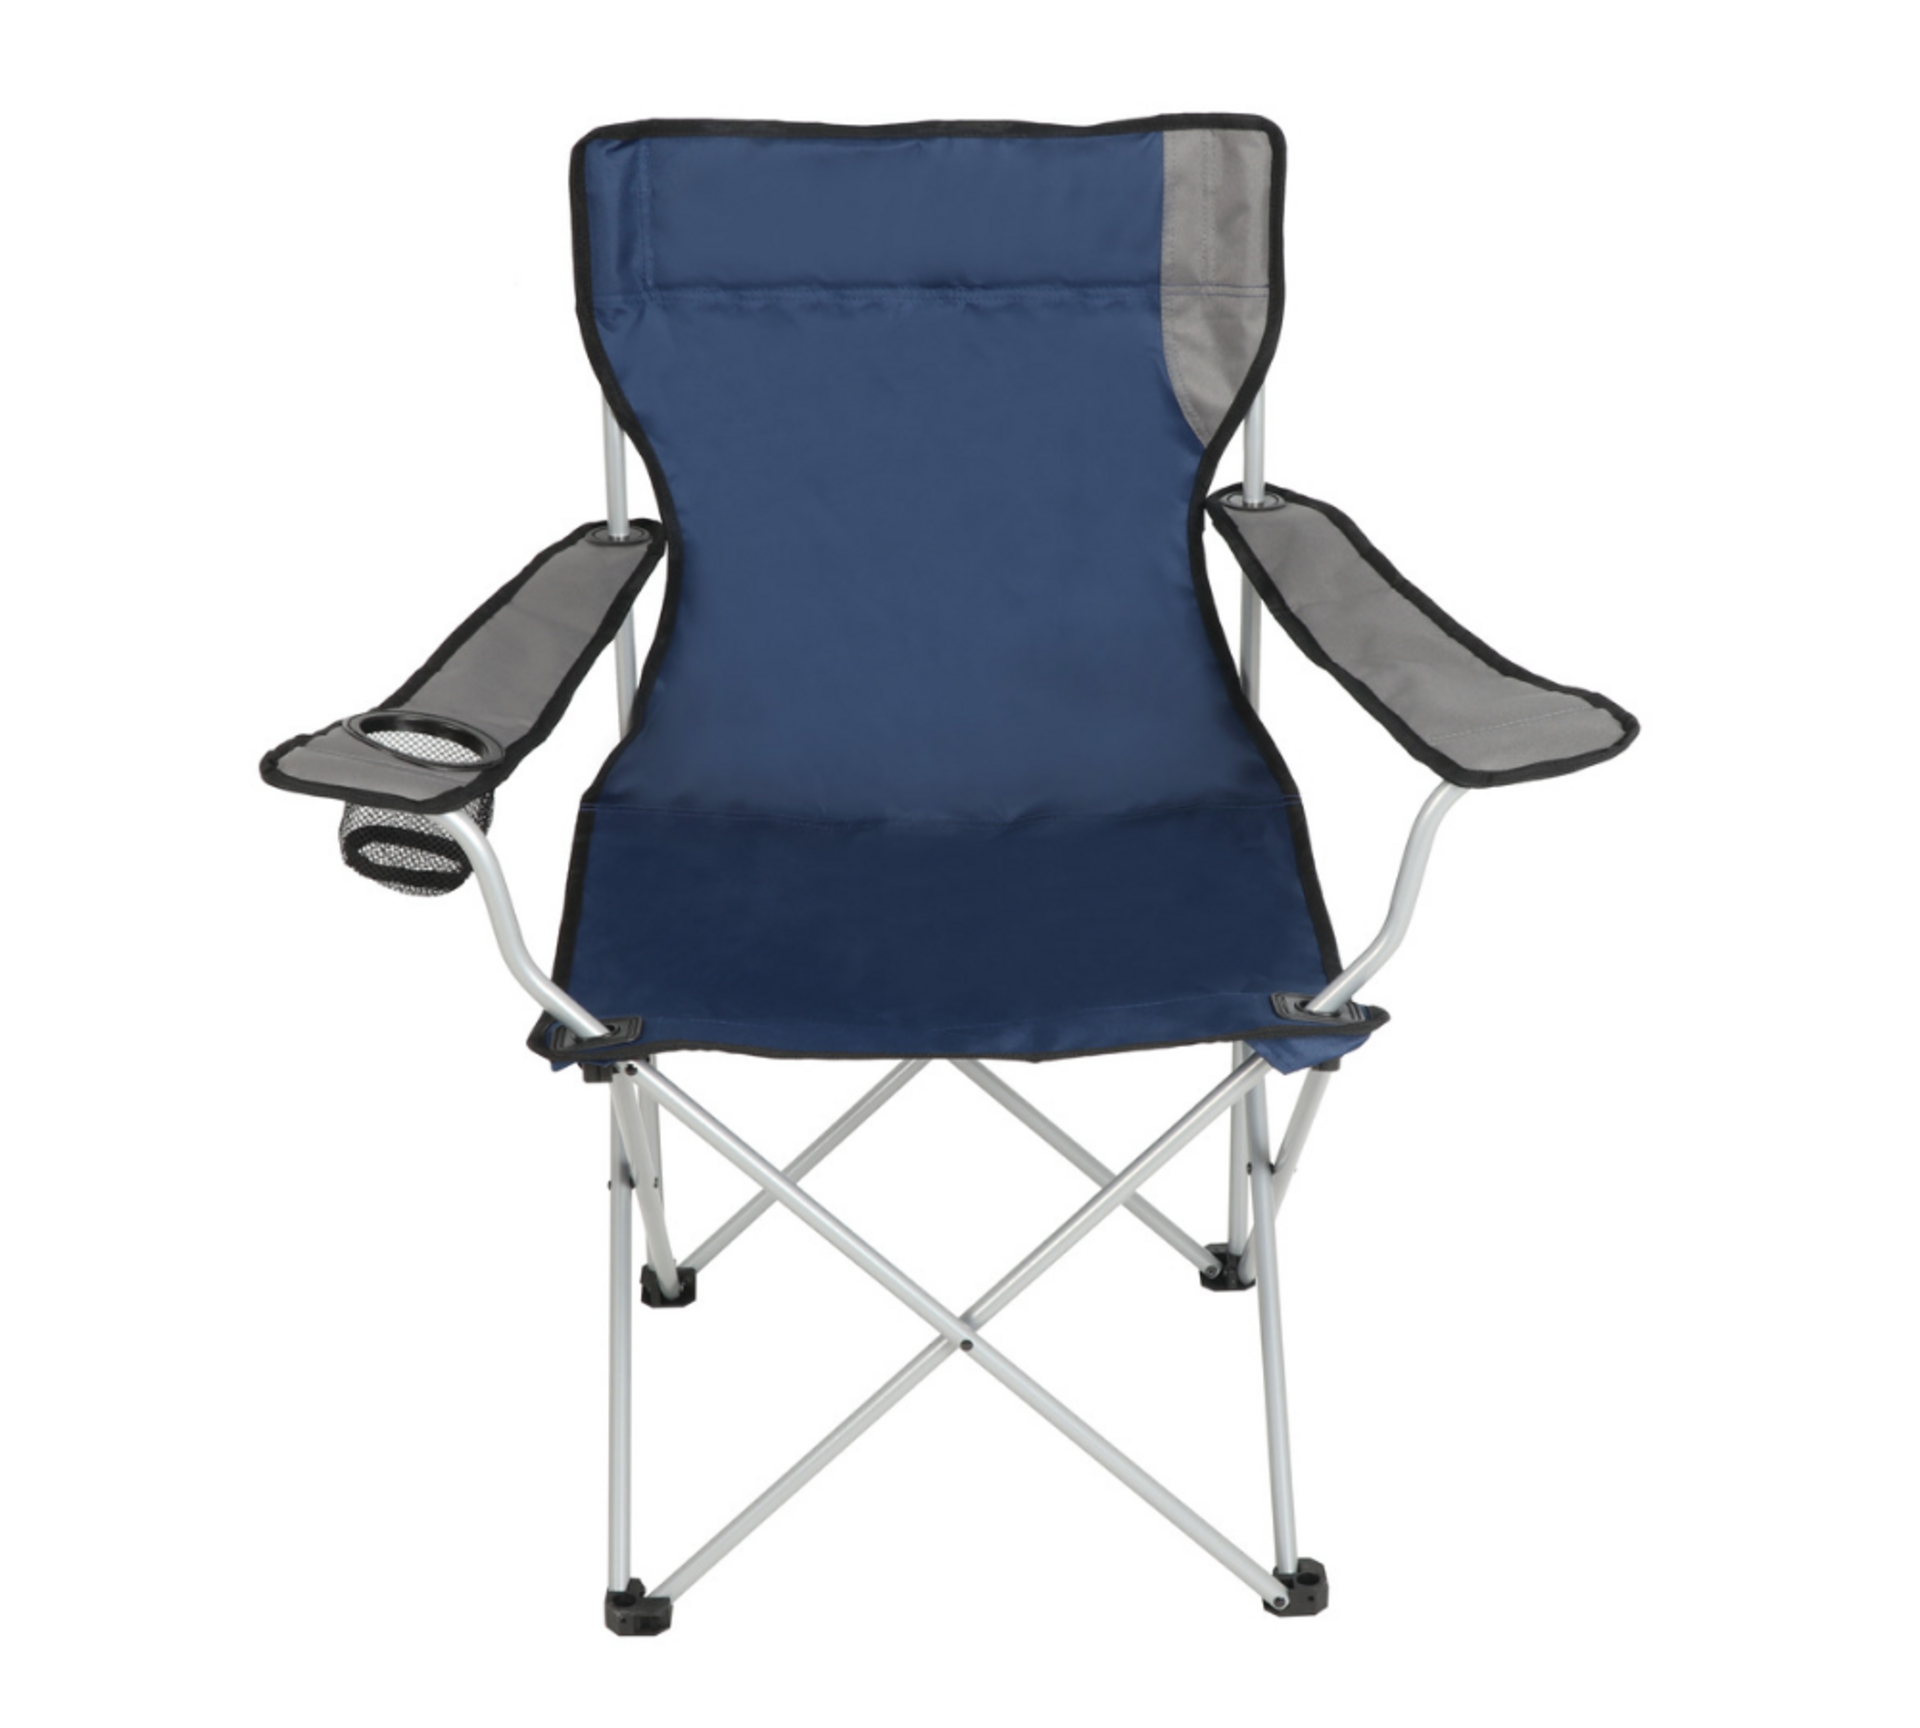 Canadian Shield Outdoors Quad Chair - 1 Pack